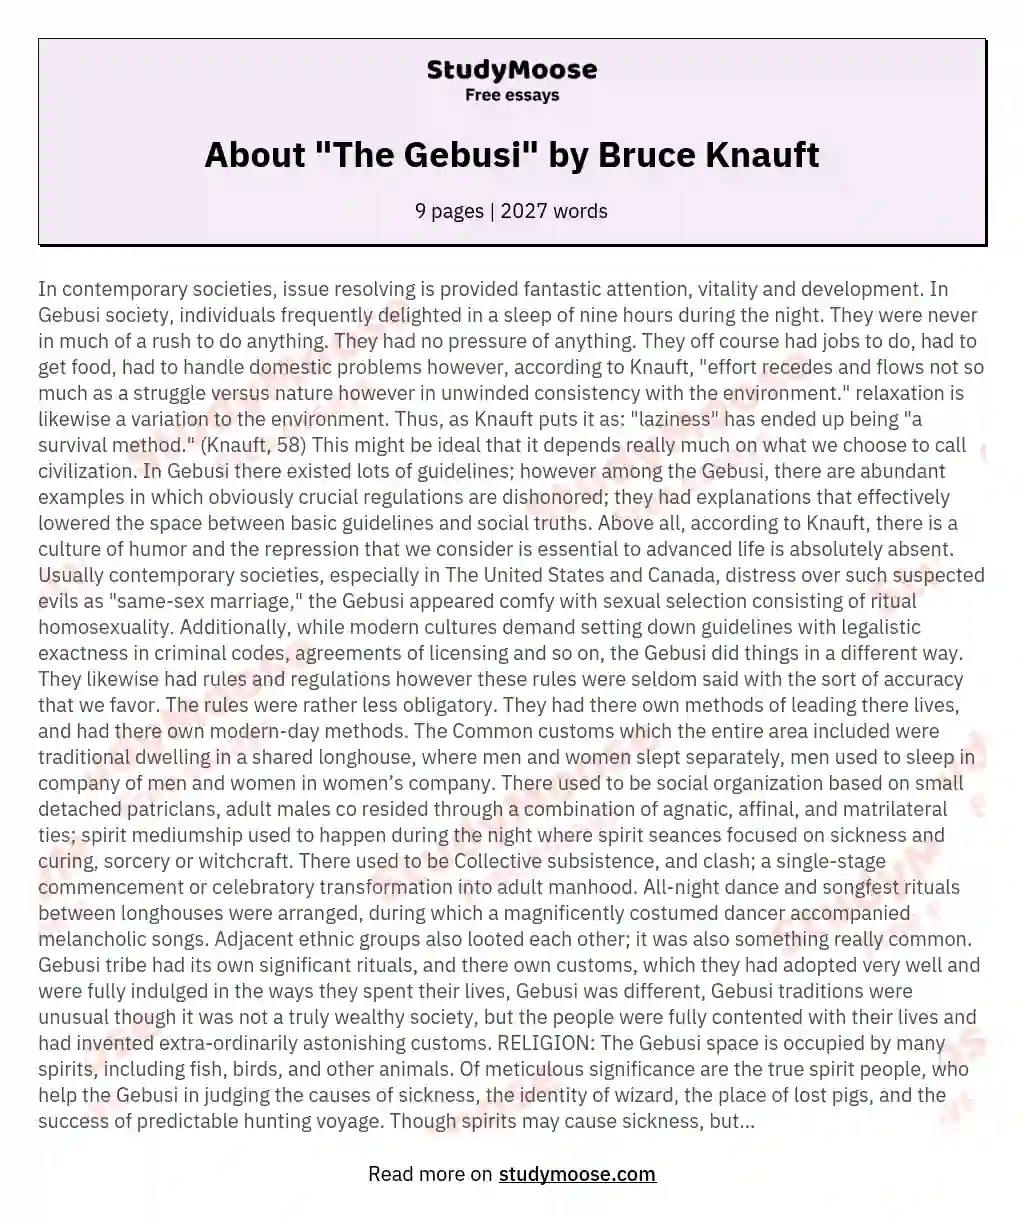 About "The Gebusi"  by Bruce Knauft essay